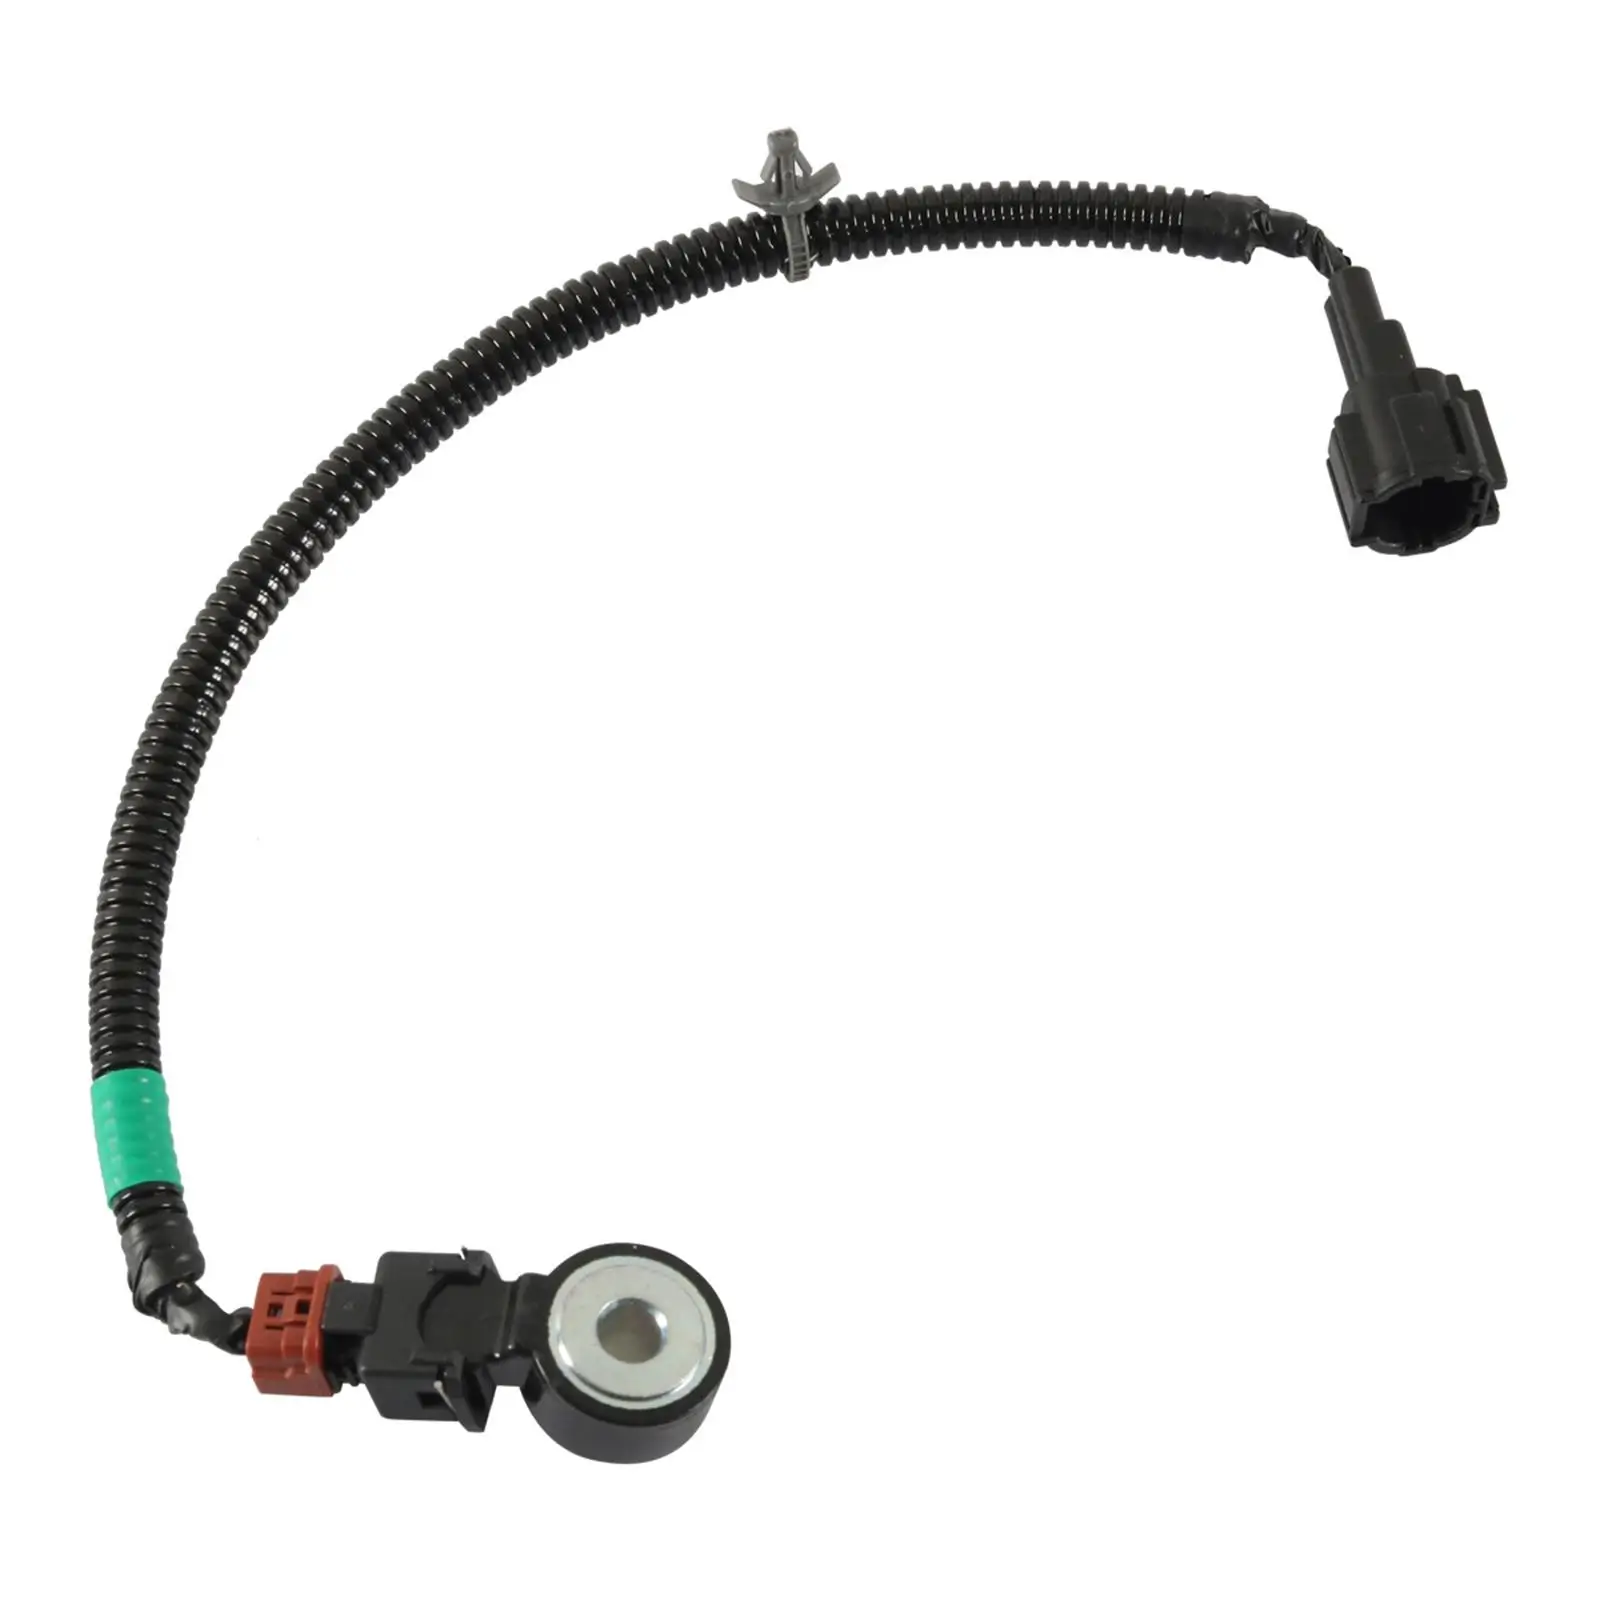 Engine Knock Sensor and Wire Harness 2407931U01 for Nissan Parts Replace Easy to Install Accessories